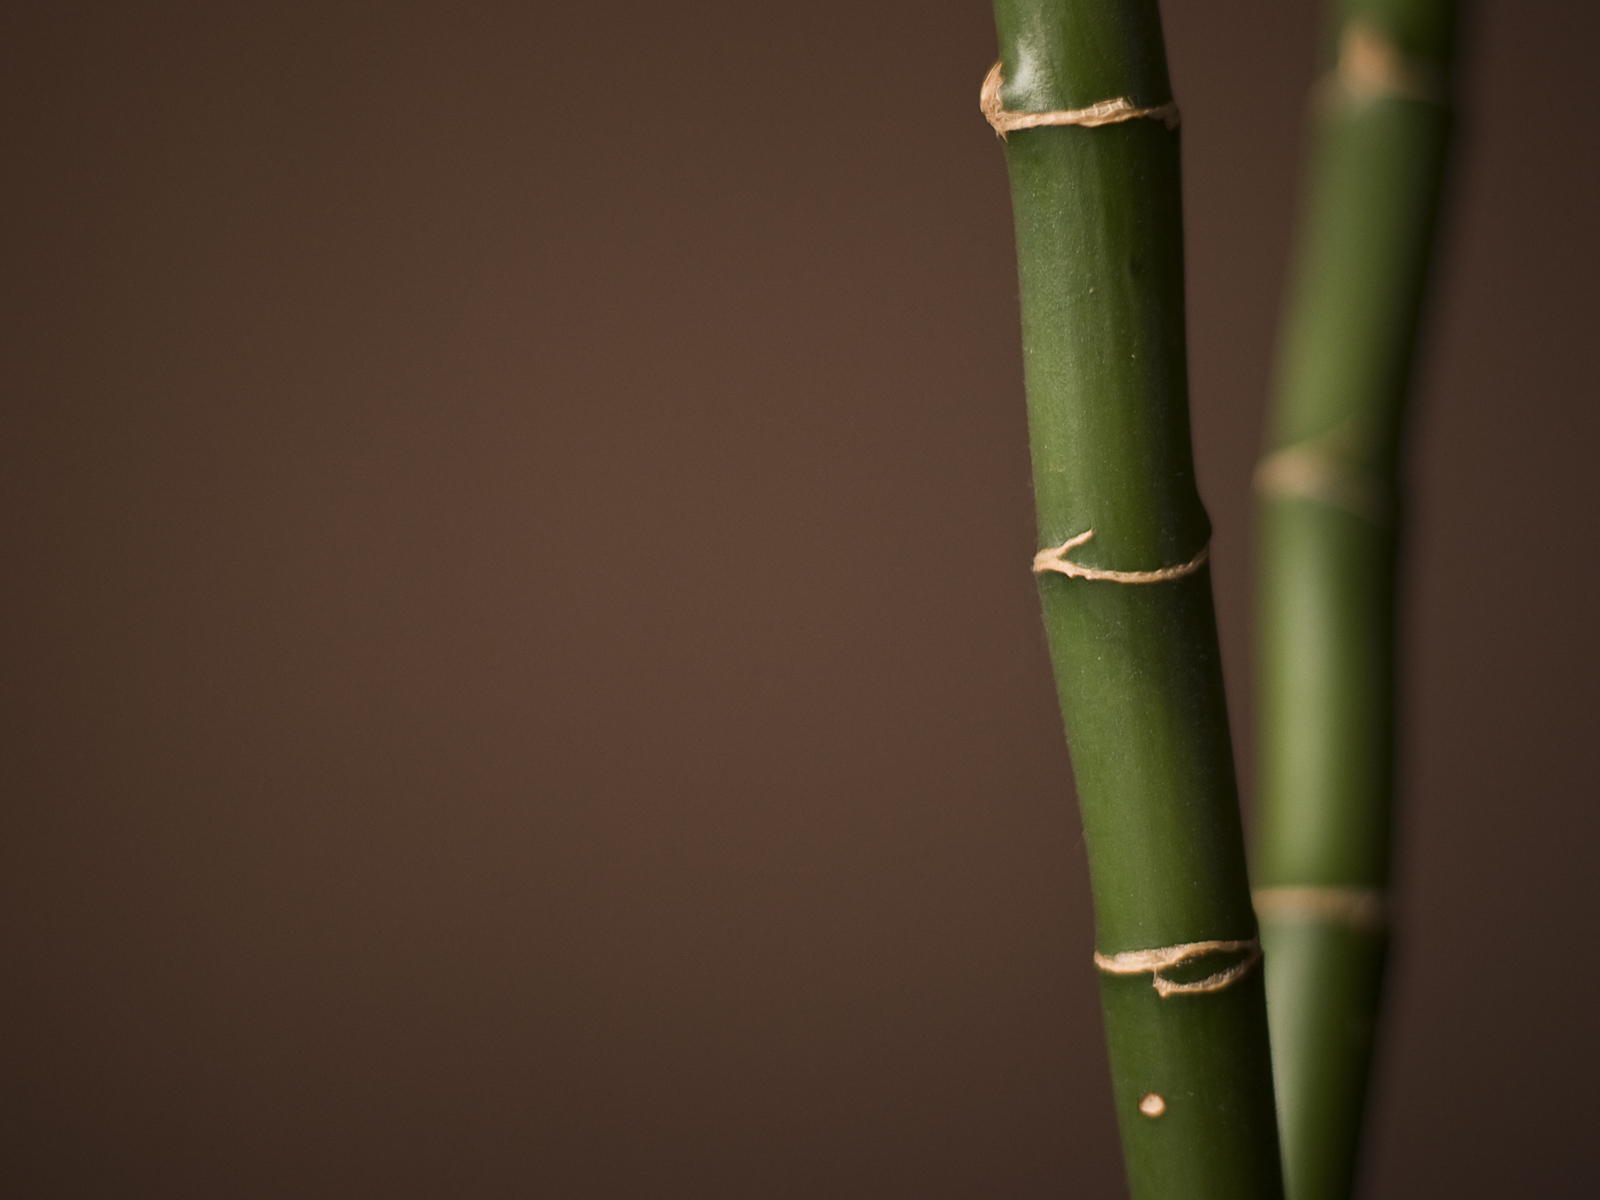 Bamboo Wallpaper For To More